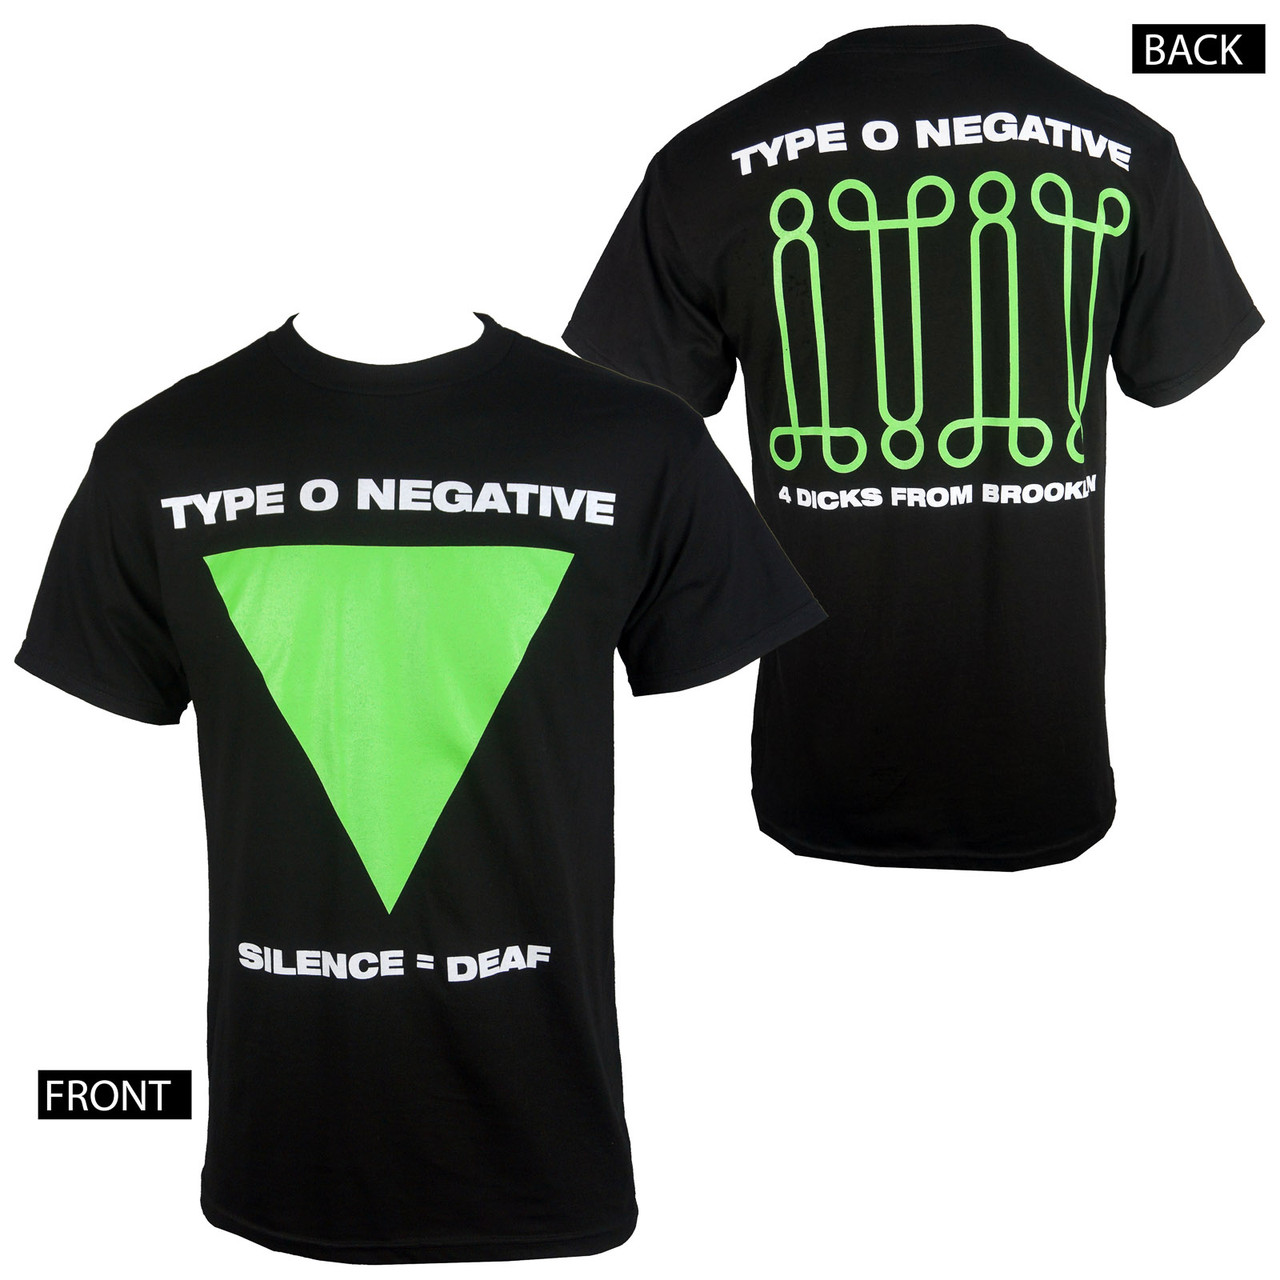 Added another type o negative shirt to the collection a while ago